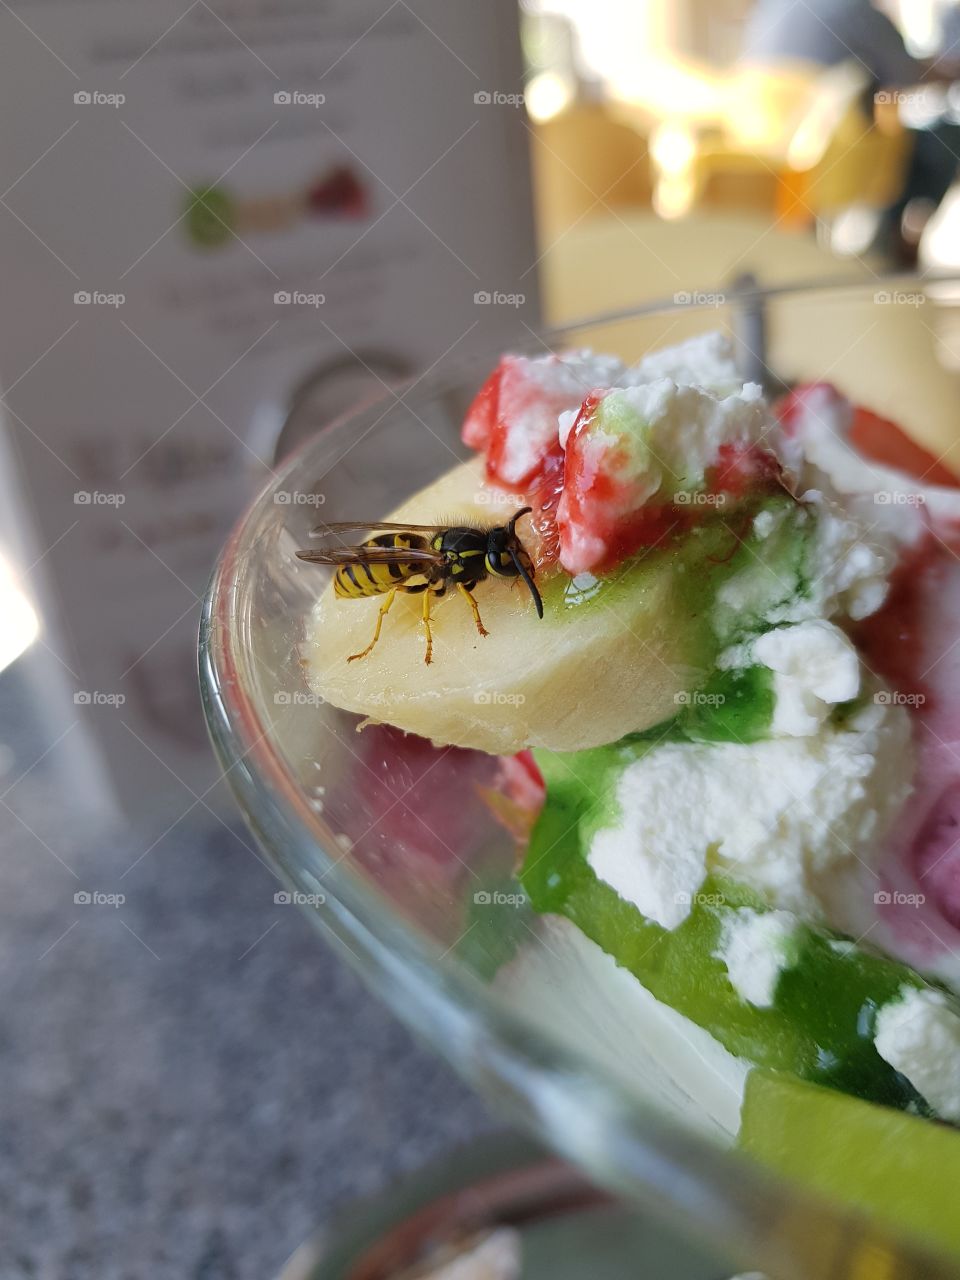 A hungry wasp